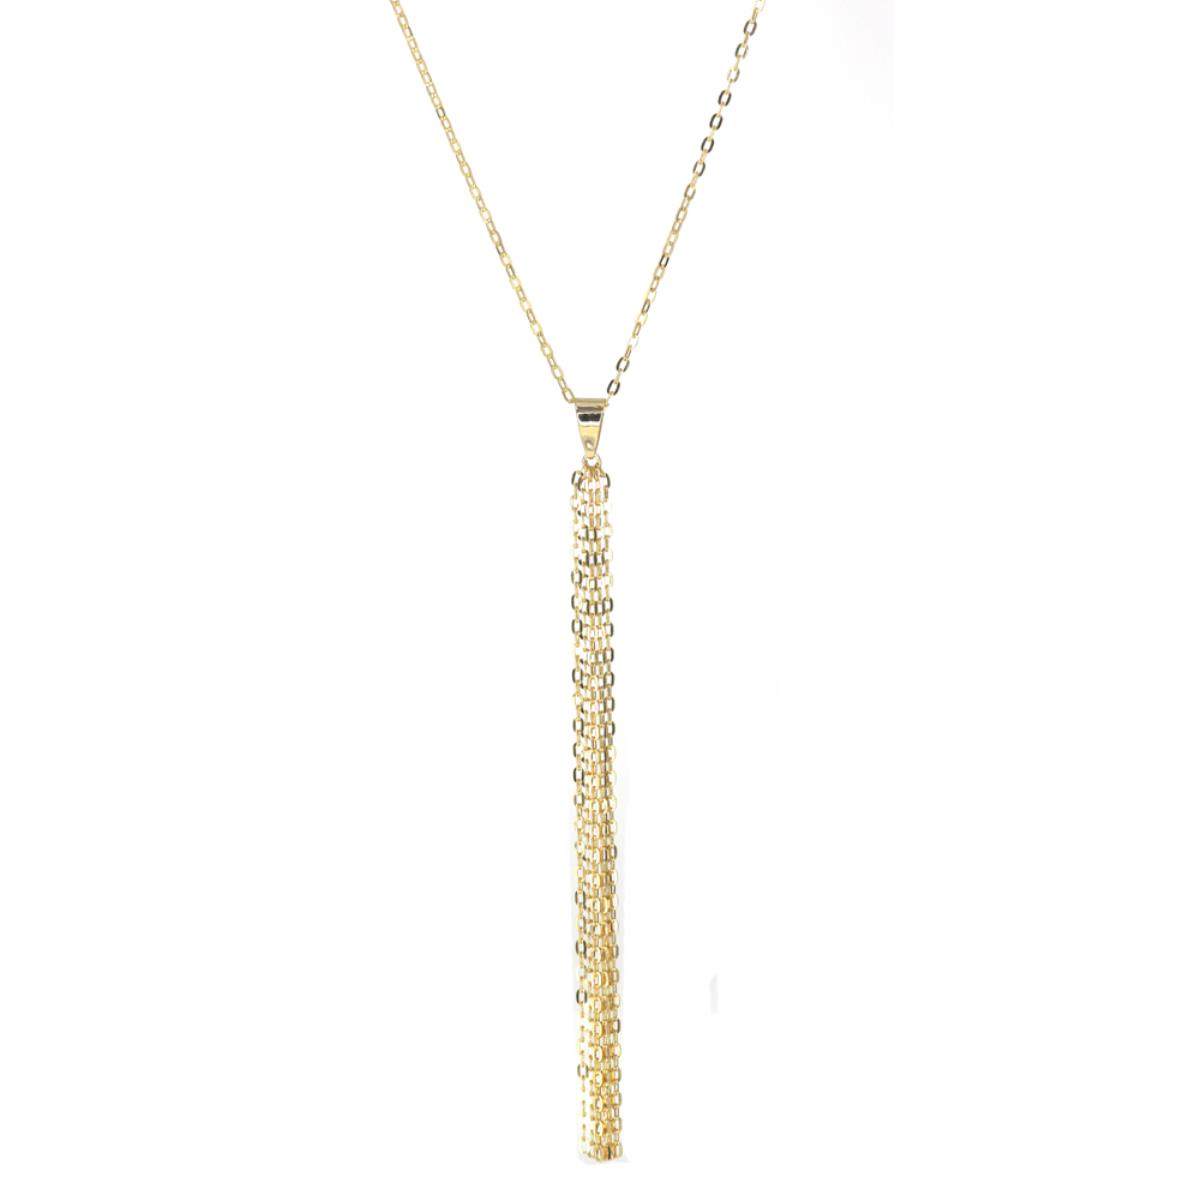 14K Yellow Gold 7-Strand Tassel 17" Chain Necklace